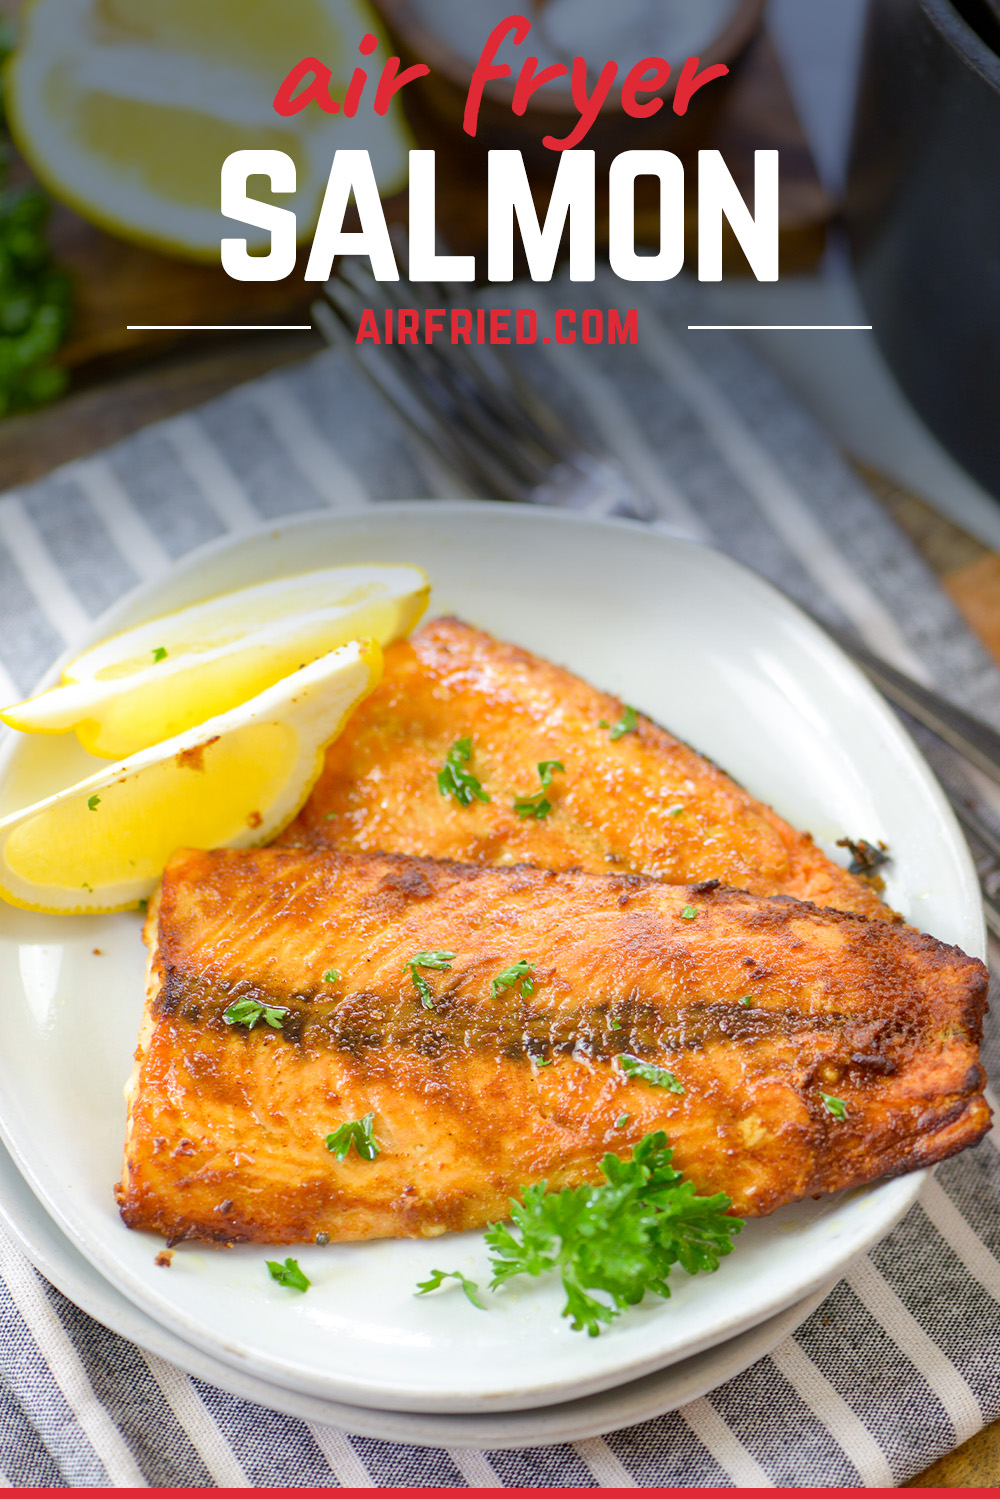 This frozen salmon was seasoned with just some simple seasonings and cooked perfectly in the air fryer!